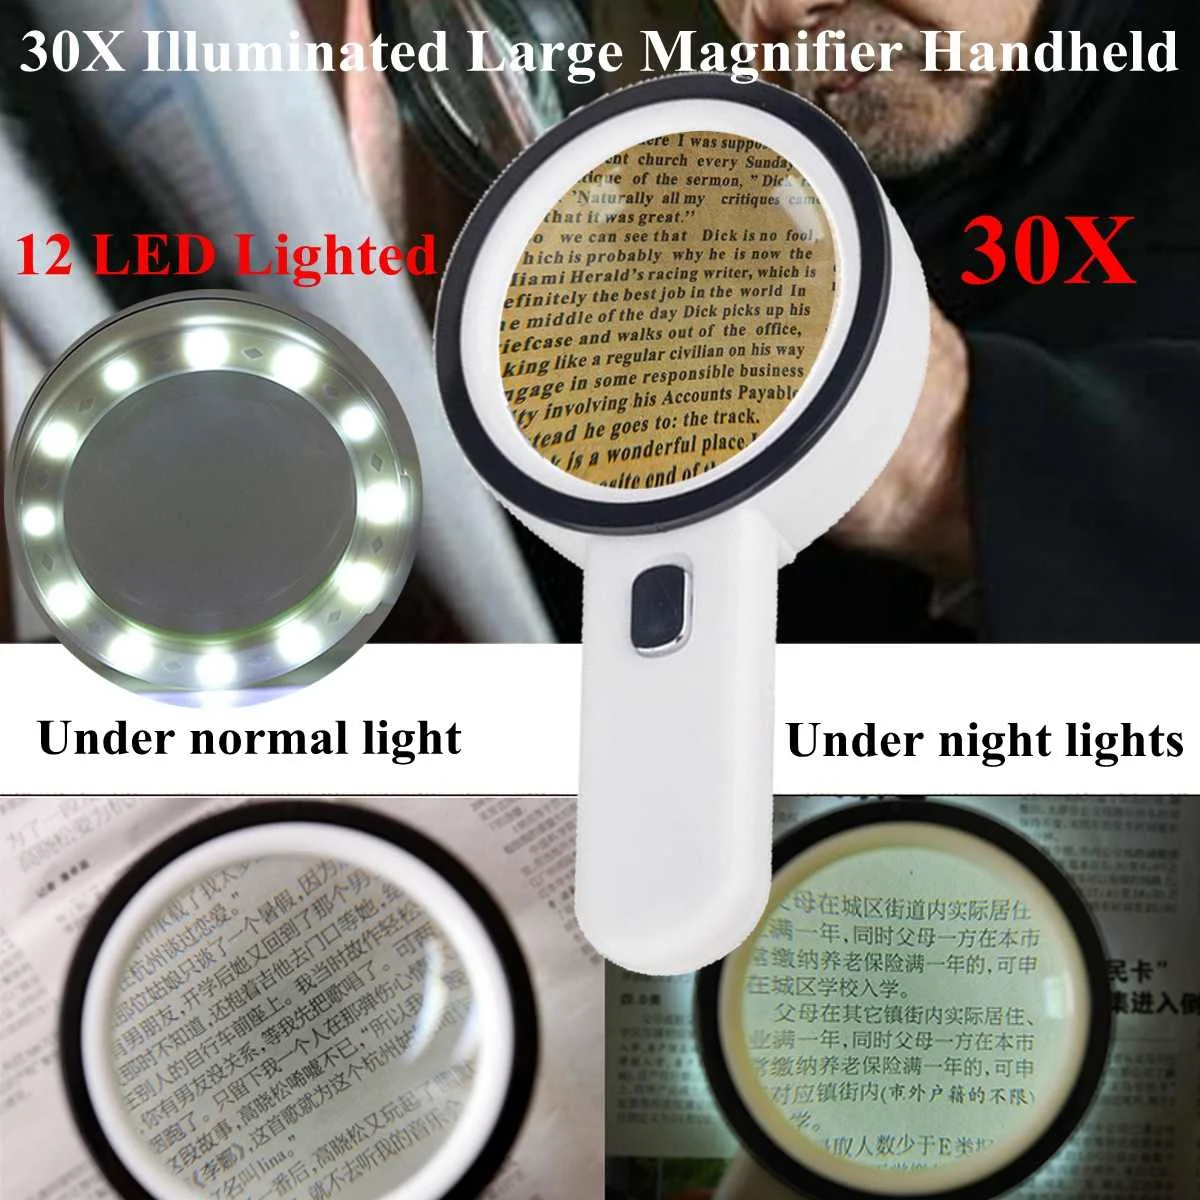 

30X Illuminated Large Magnifier Handheld 12 LED Lighted Magnifying Glass for Seniors Reading Soldering Jewelry Exploring